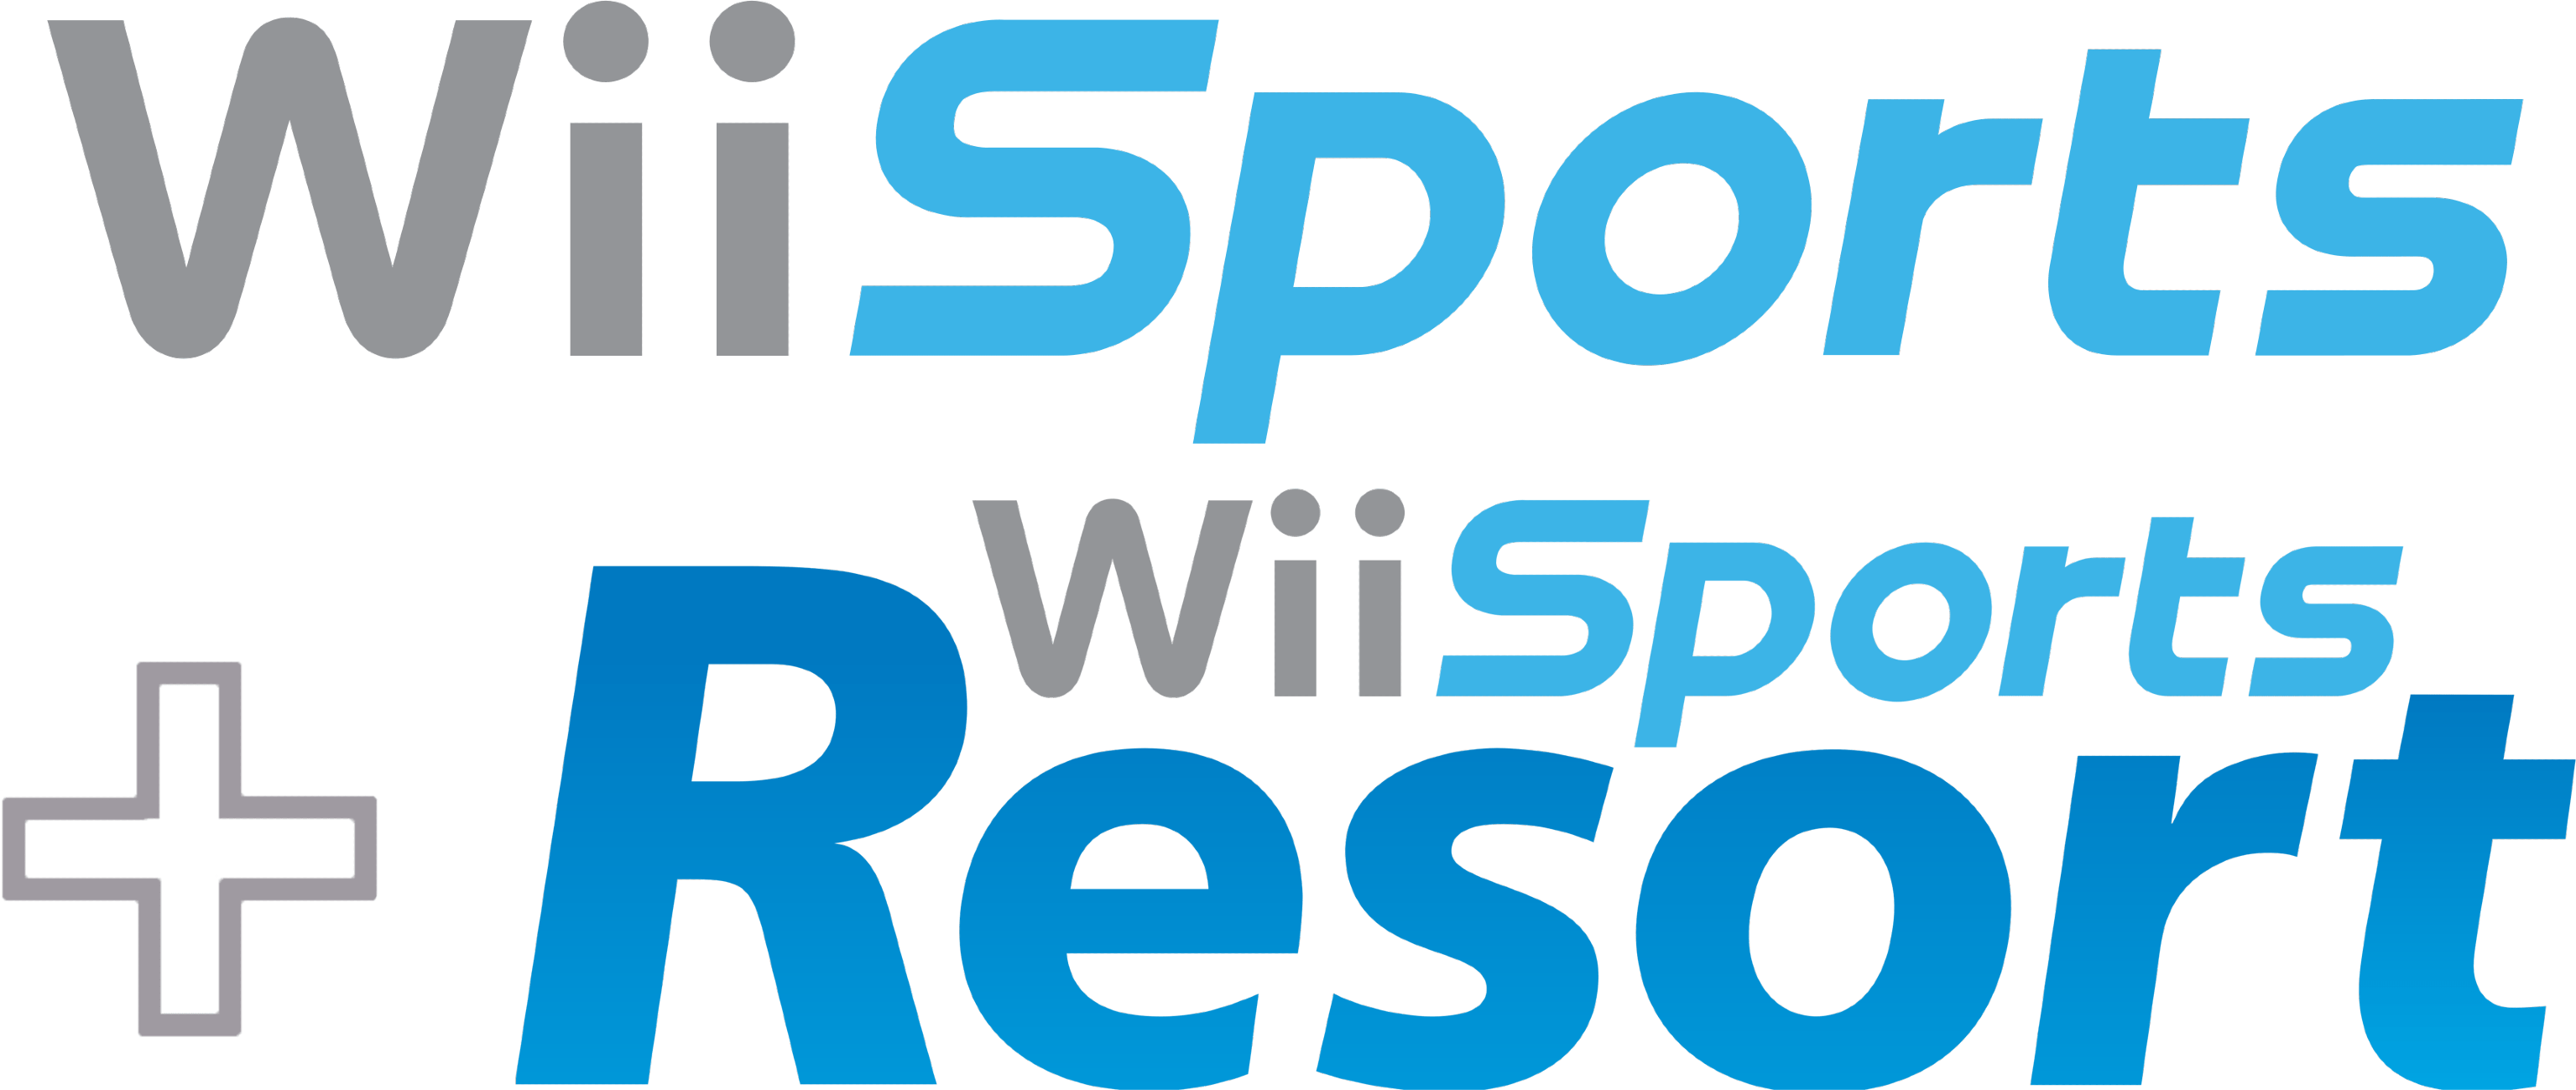 Wii Sports Logo PNG